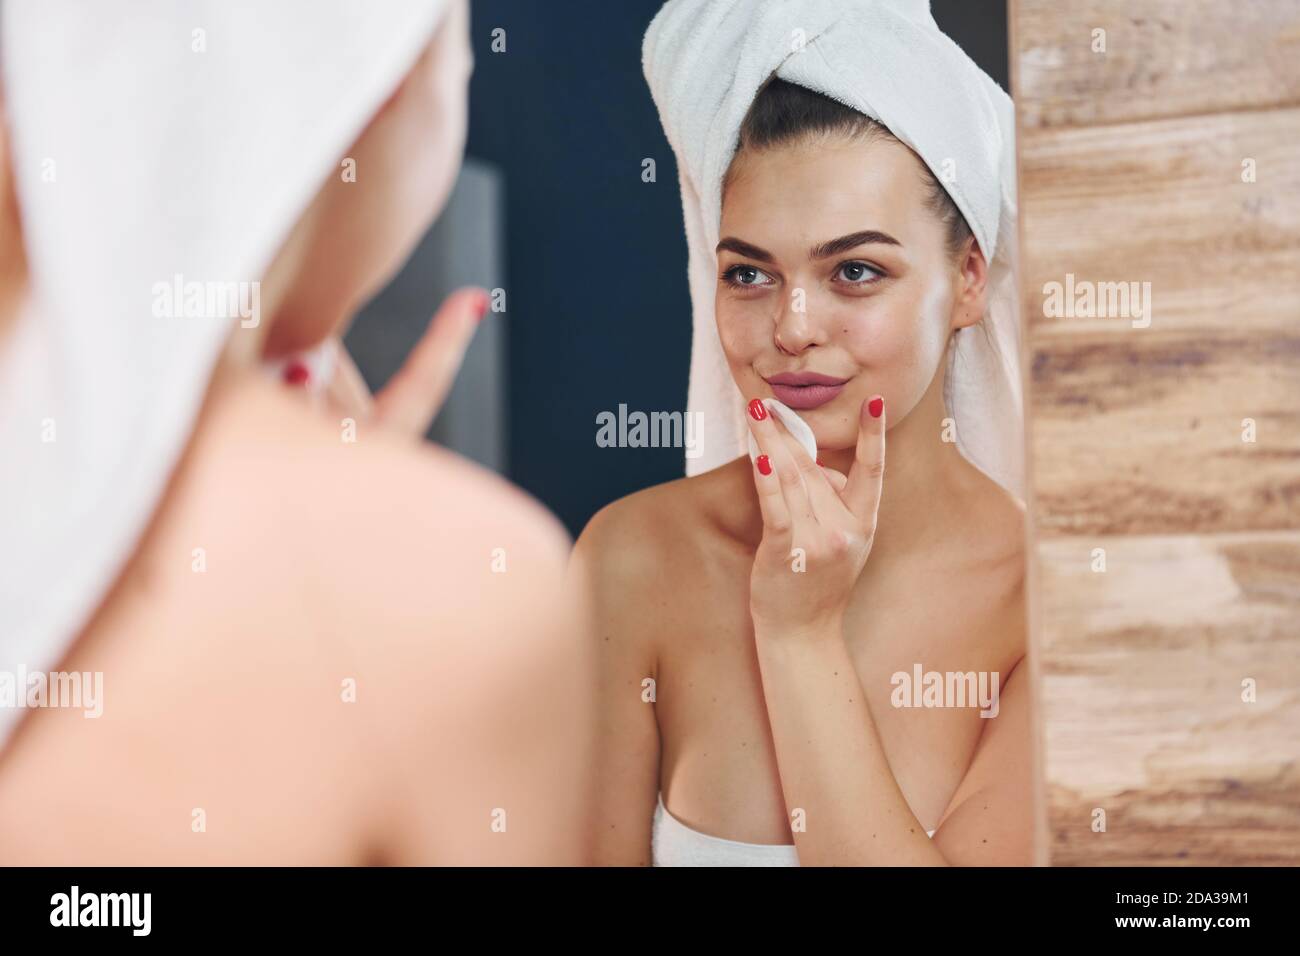 Beautiful young woman standing in bathroom, looking into the mirror and taking care of her face. Stock Photo